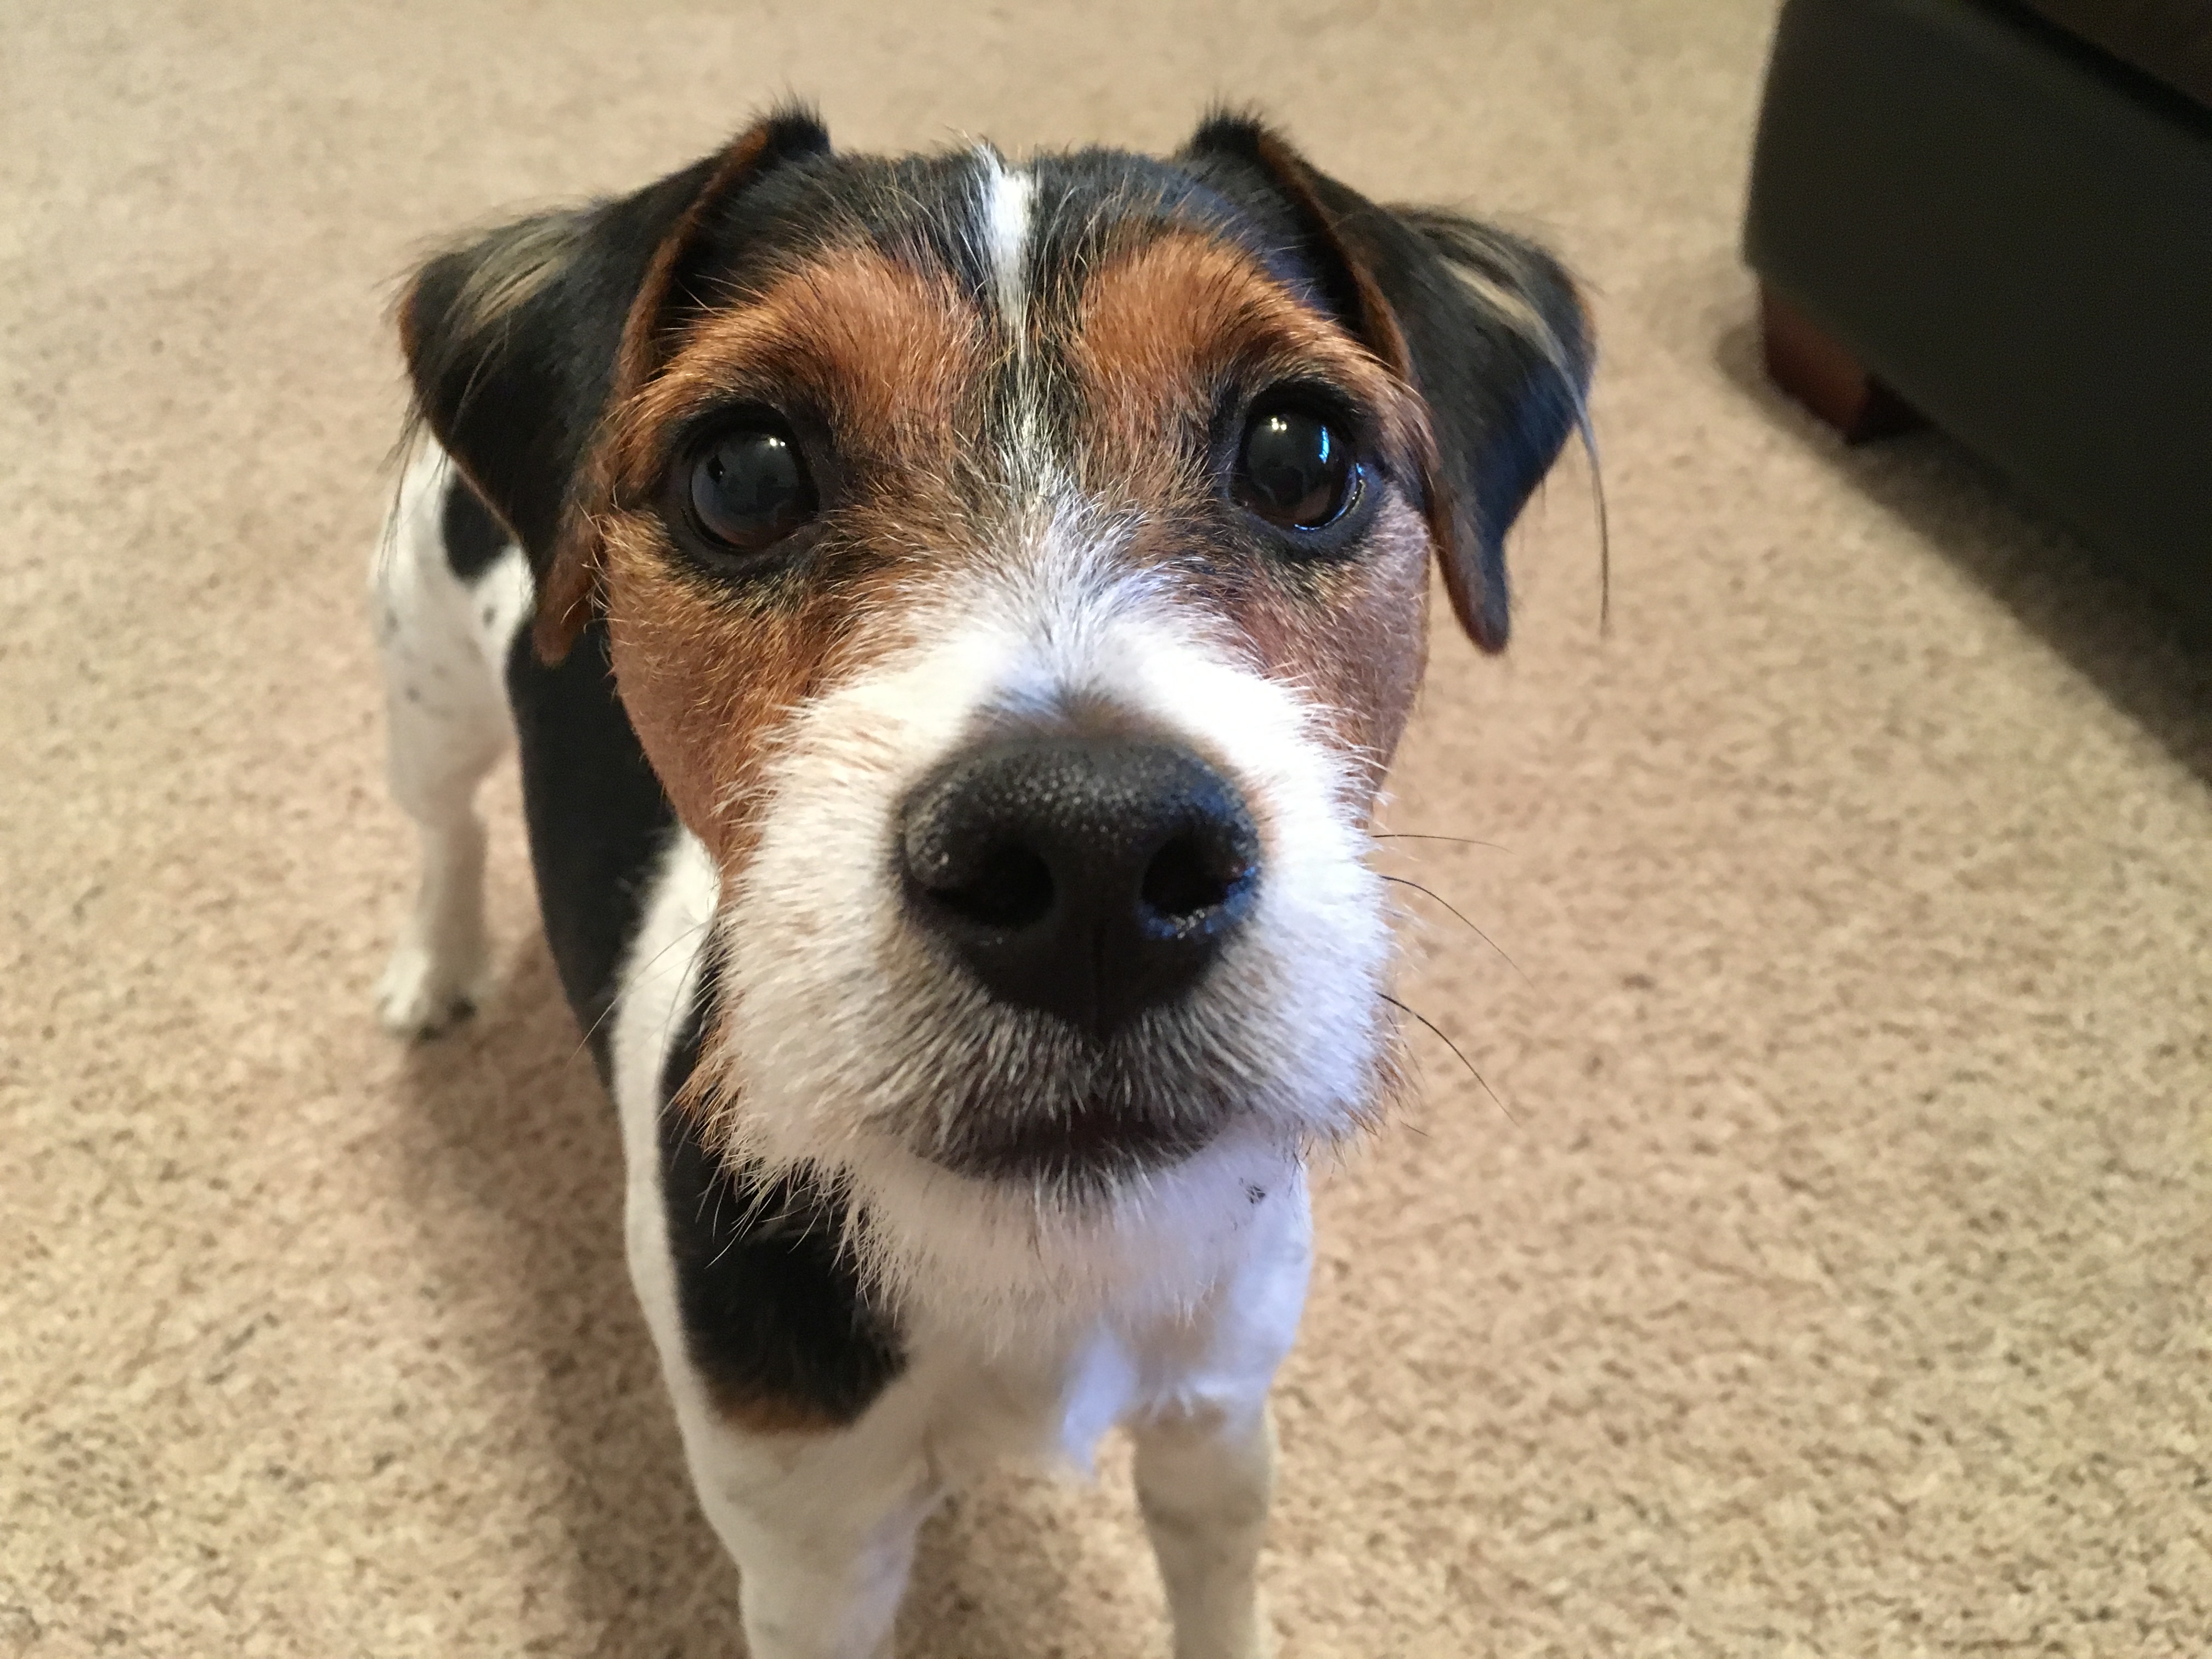 Helping a Nervous Jack Russell Terrier Learn to Relax: Dog Gone Problems